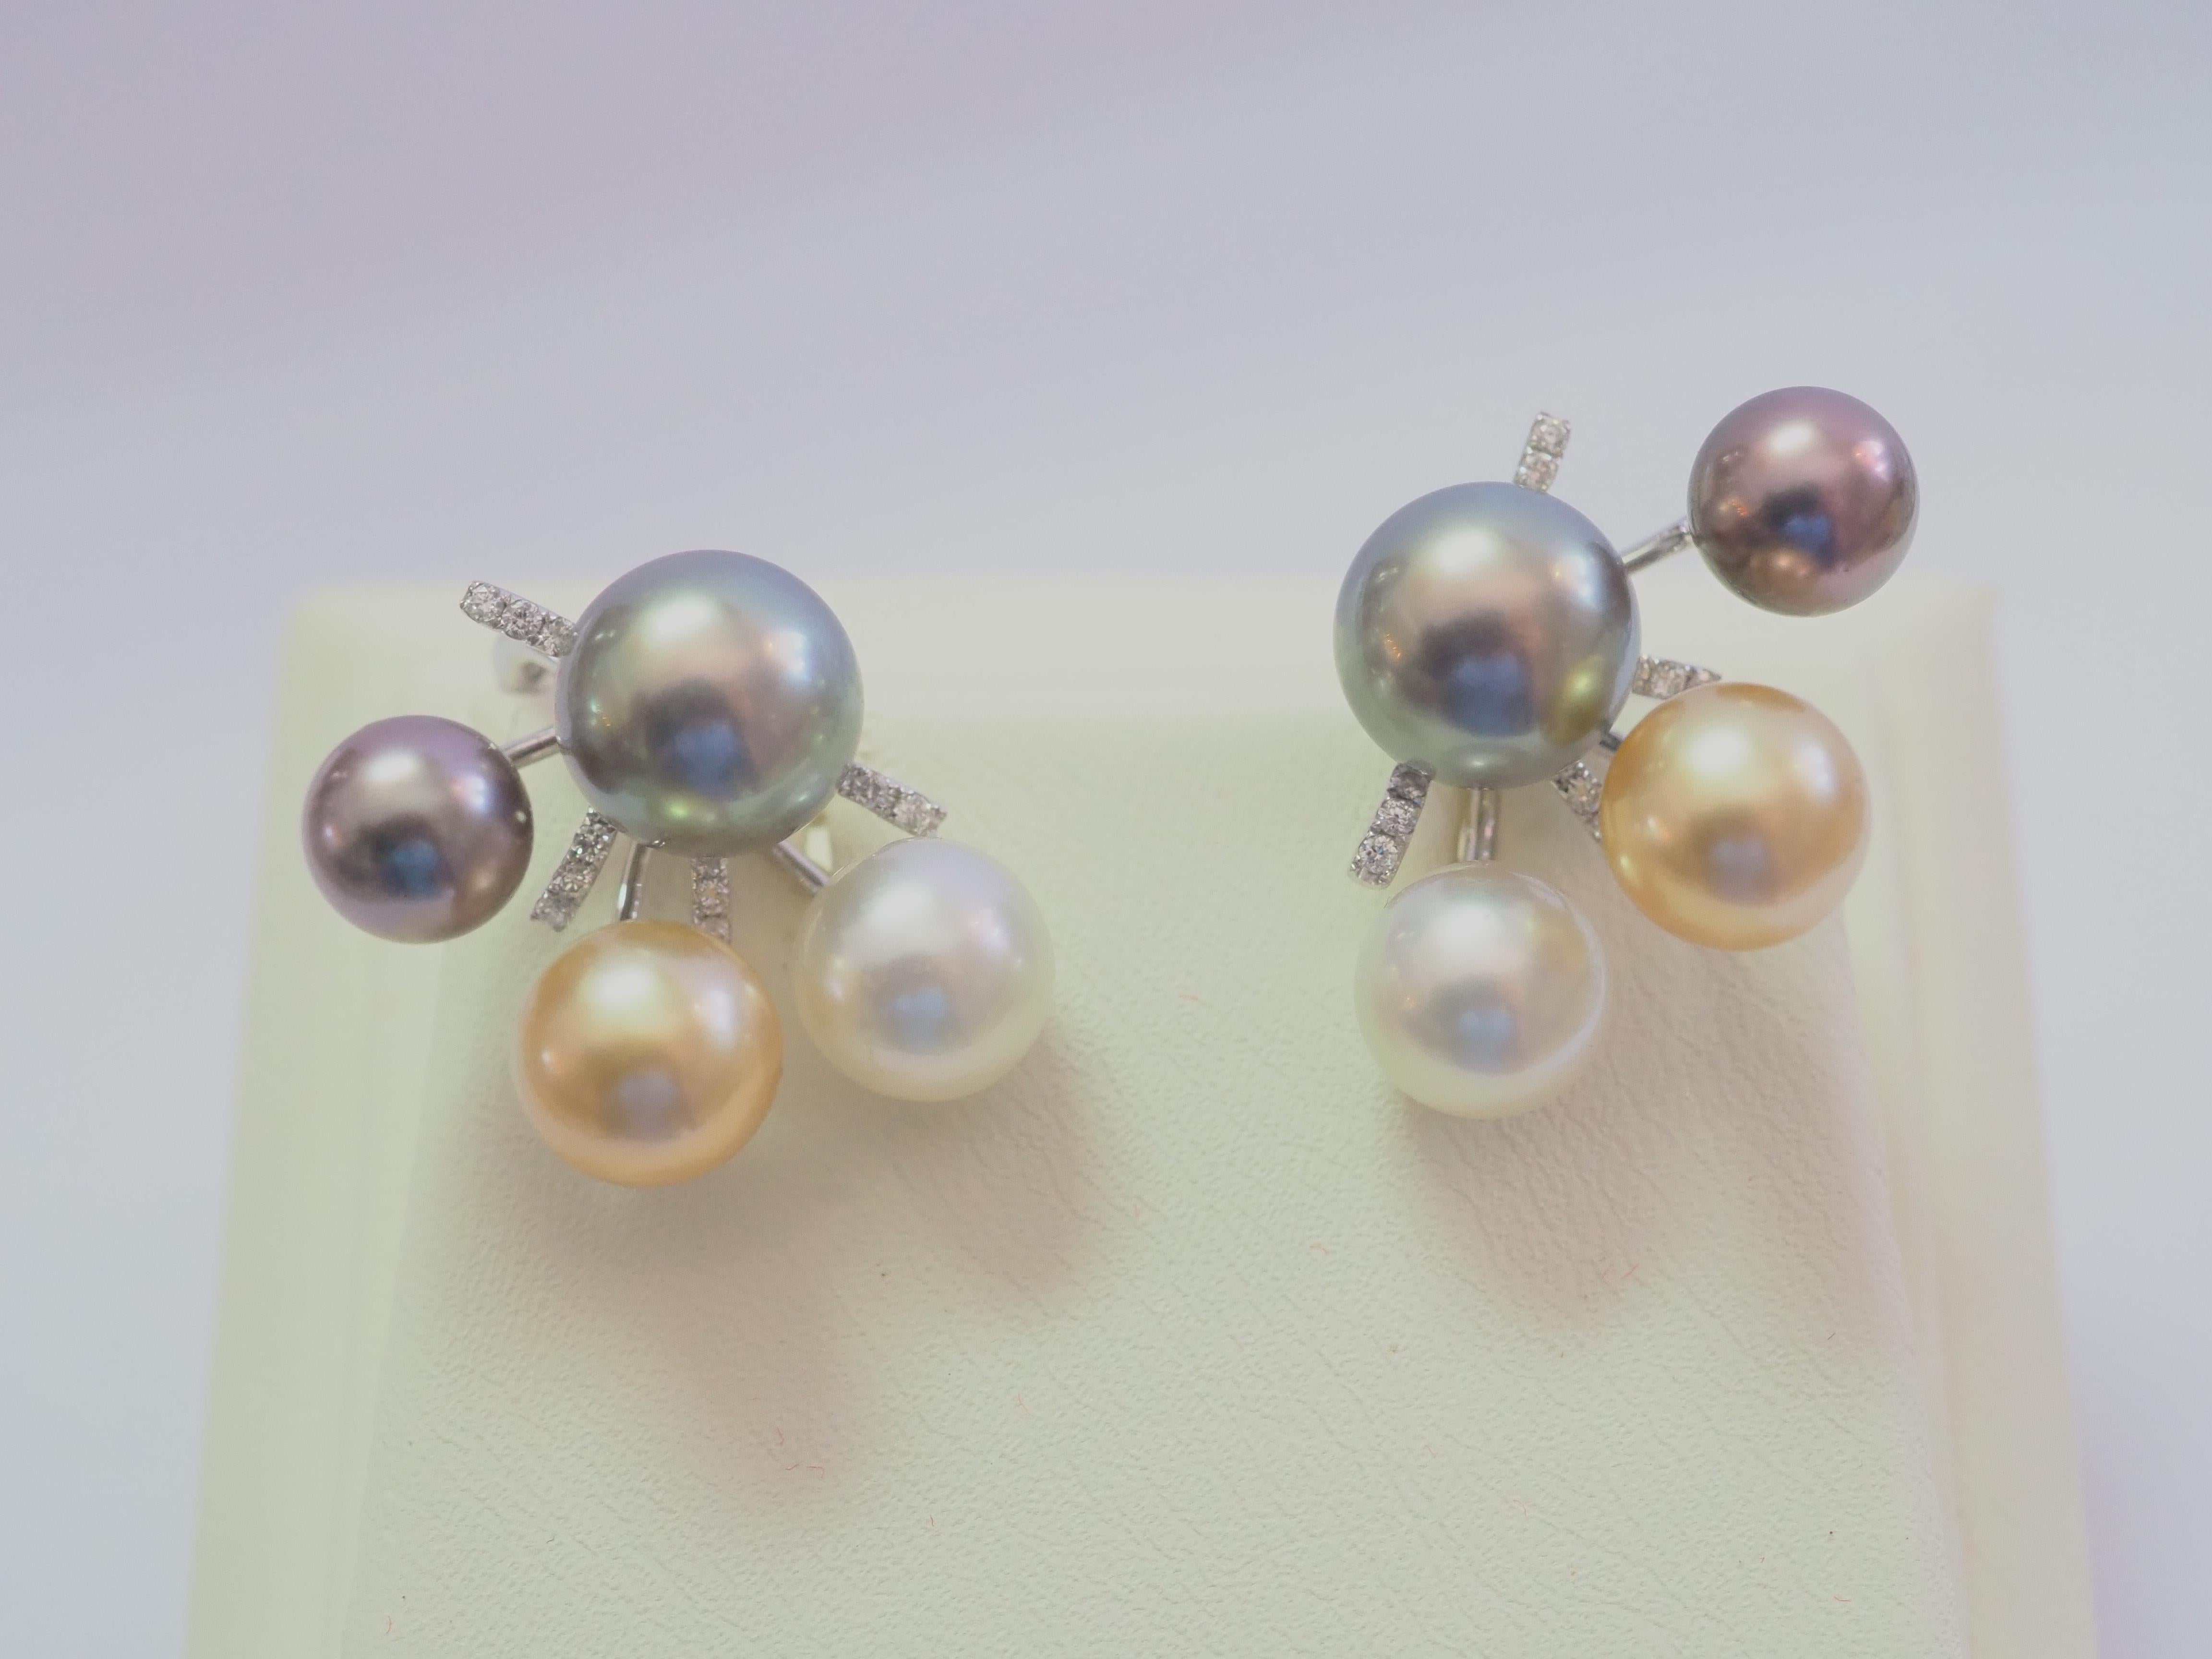 Awesome piece of jewelry and stunning in every way. This magnificent and creative latch- back earring uses varieties of colors of pearls very nicely. The metal work is also elegant with curves. The sea pearls range from brown, golden, black and